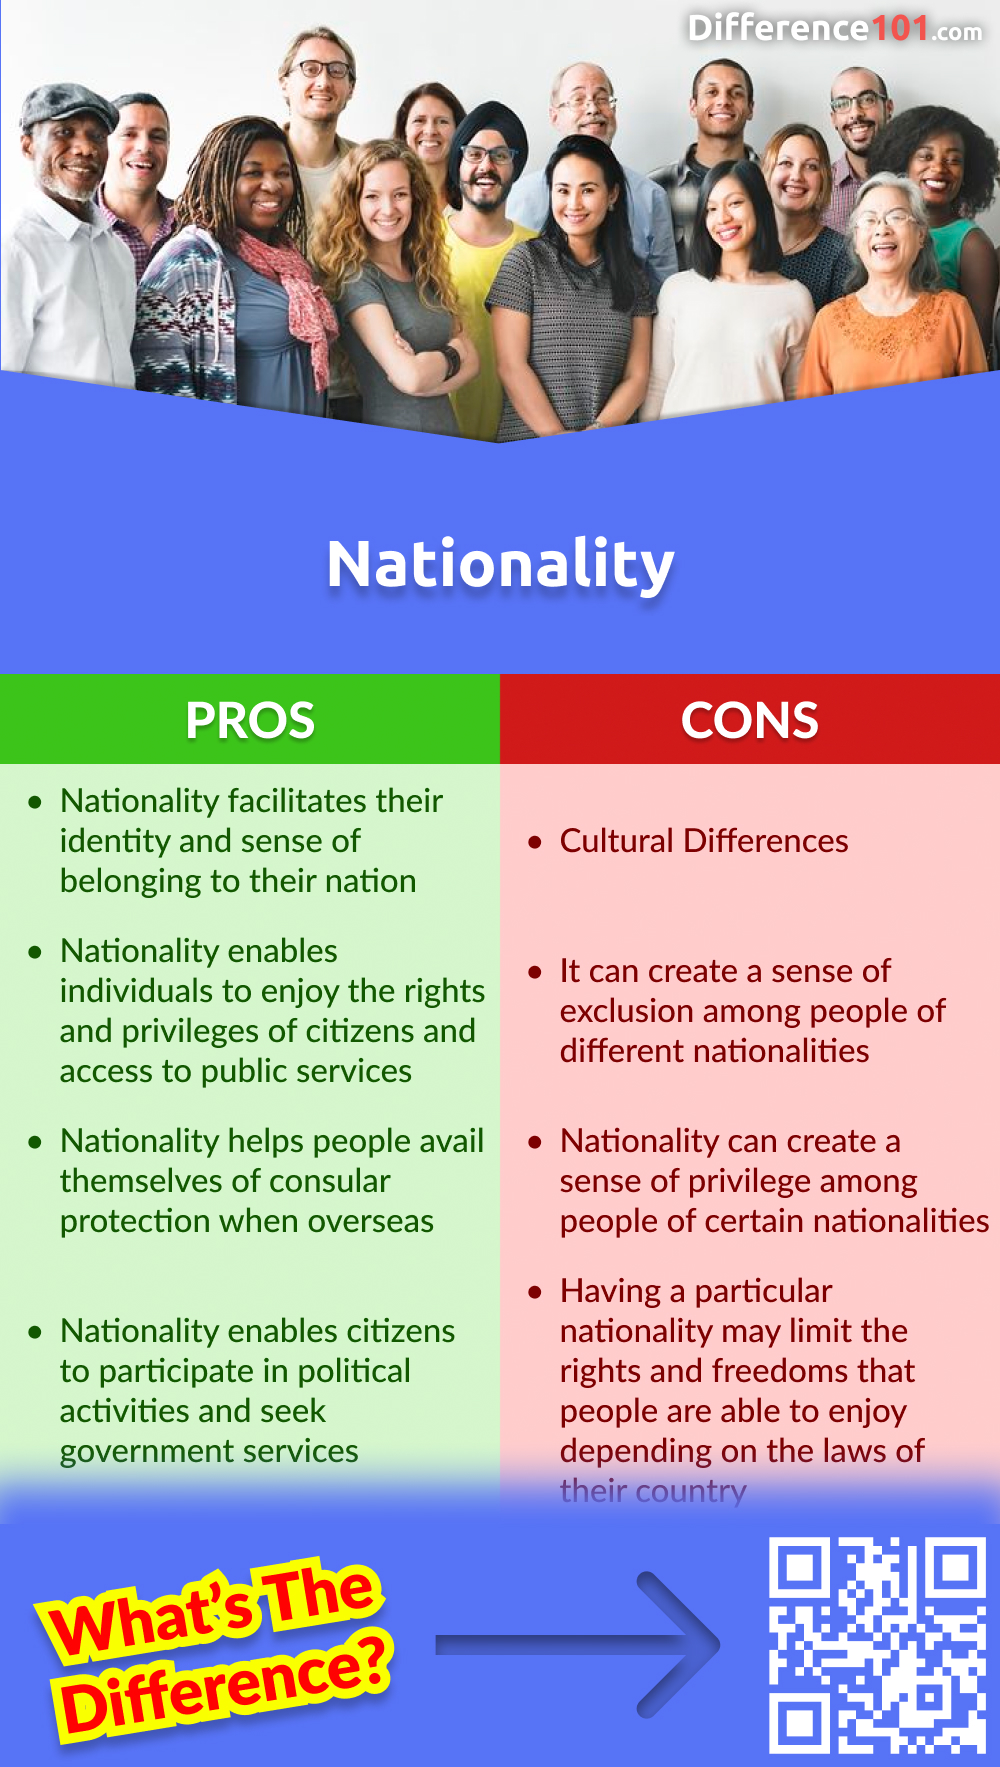 Nationality Pros & Cons